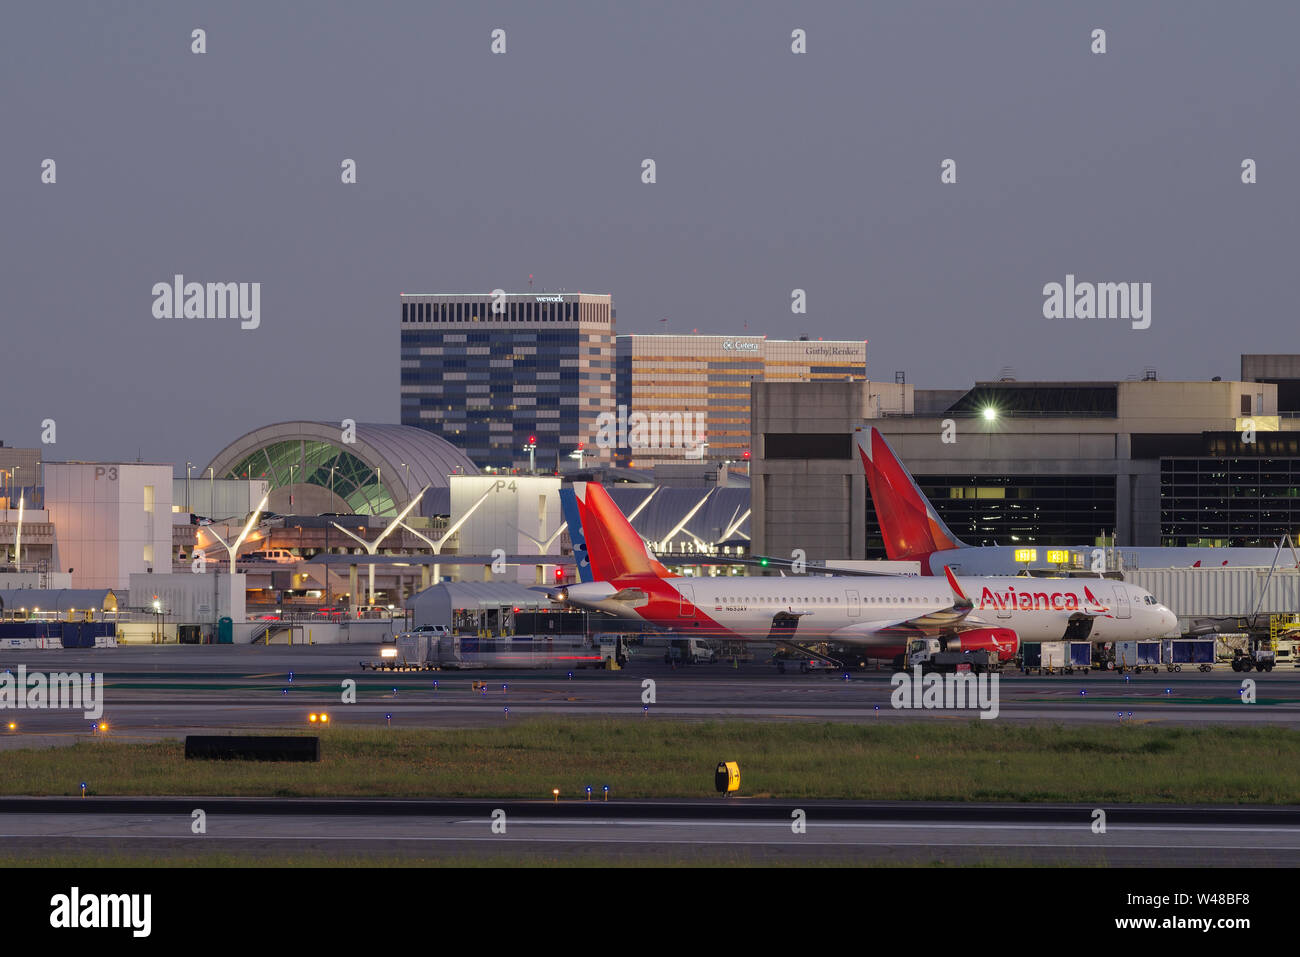 Image, looking south, showing an Avianca Airbus aircraft at a gate in the Los Angeles International Airport, LAX, at dusk. Stock Photo